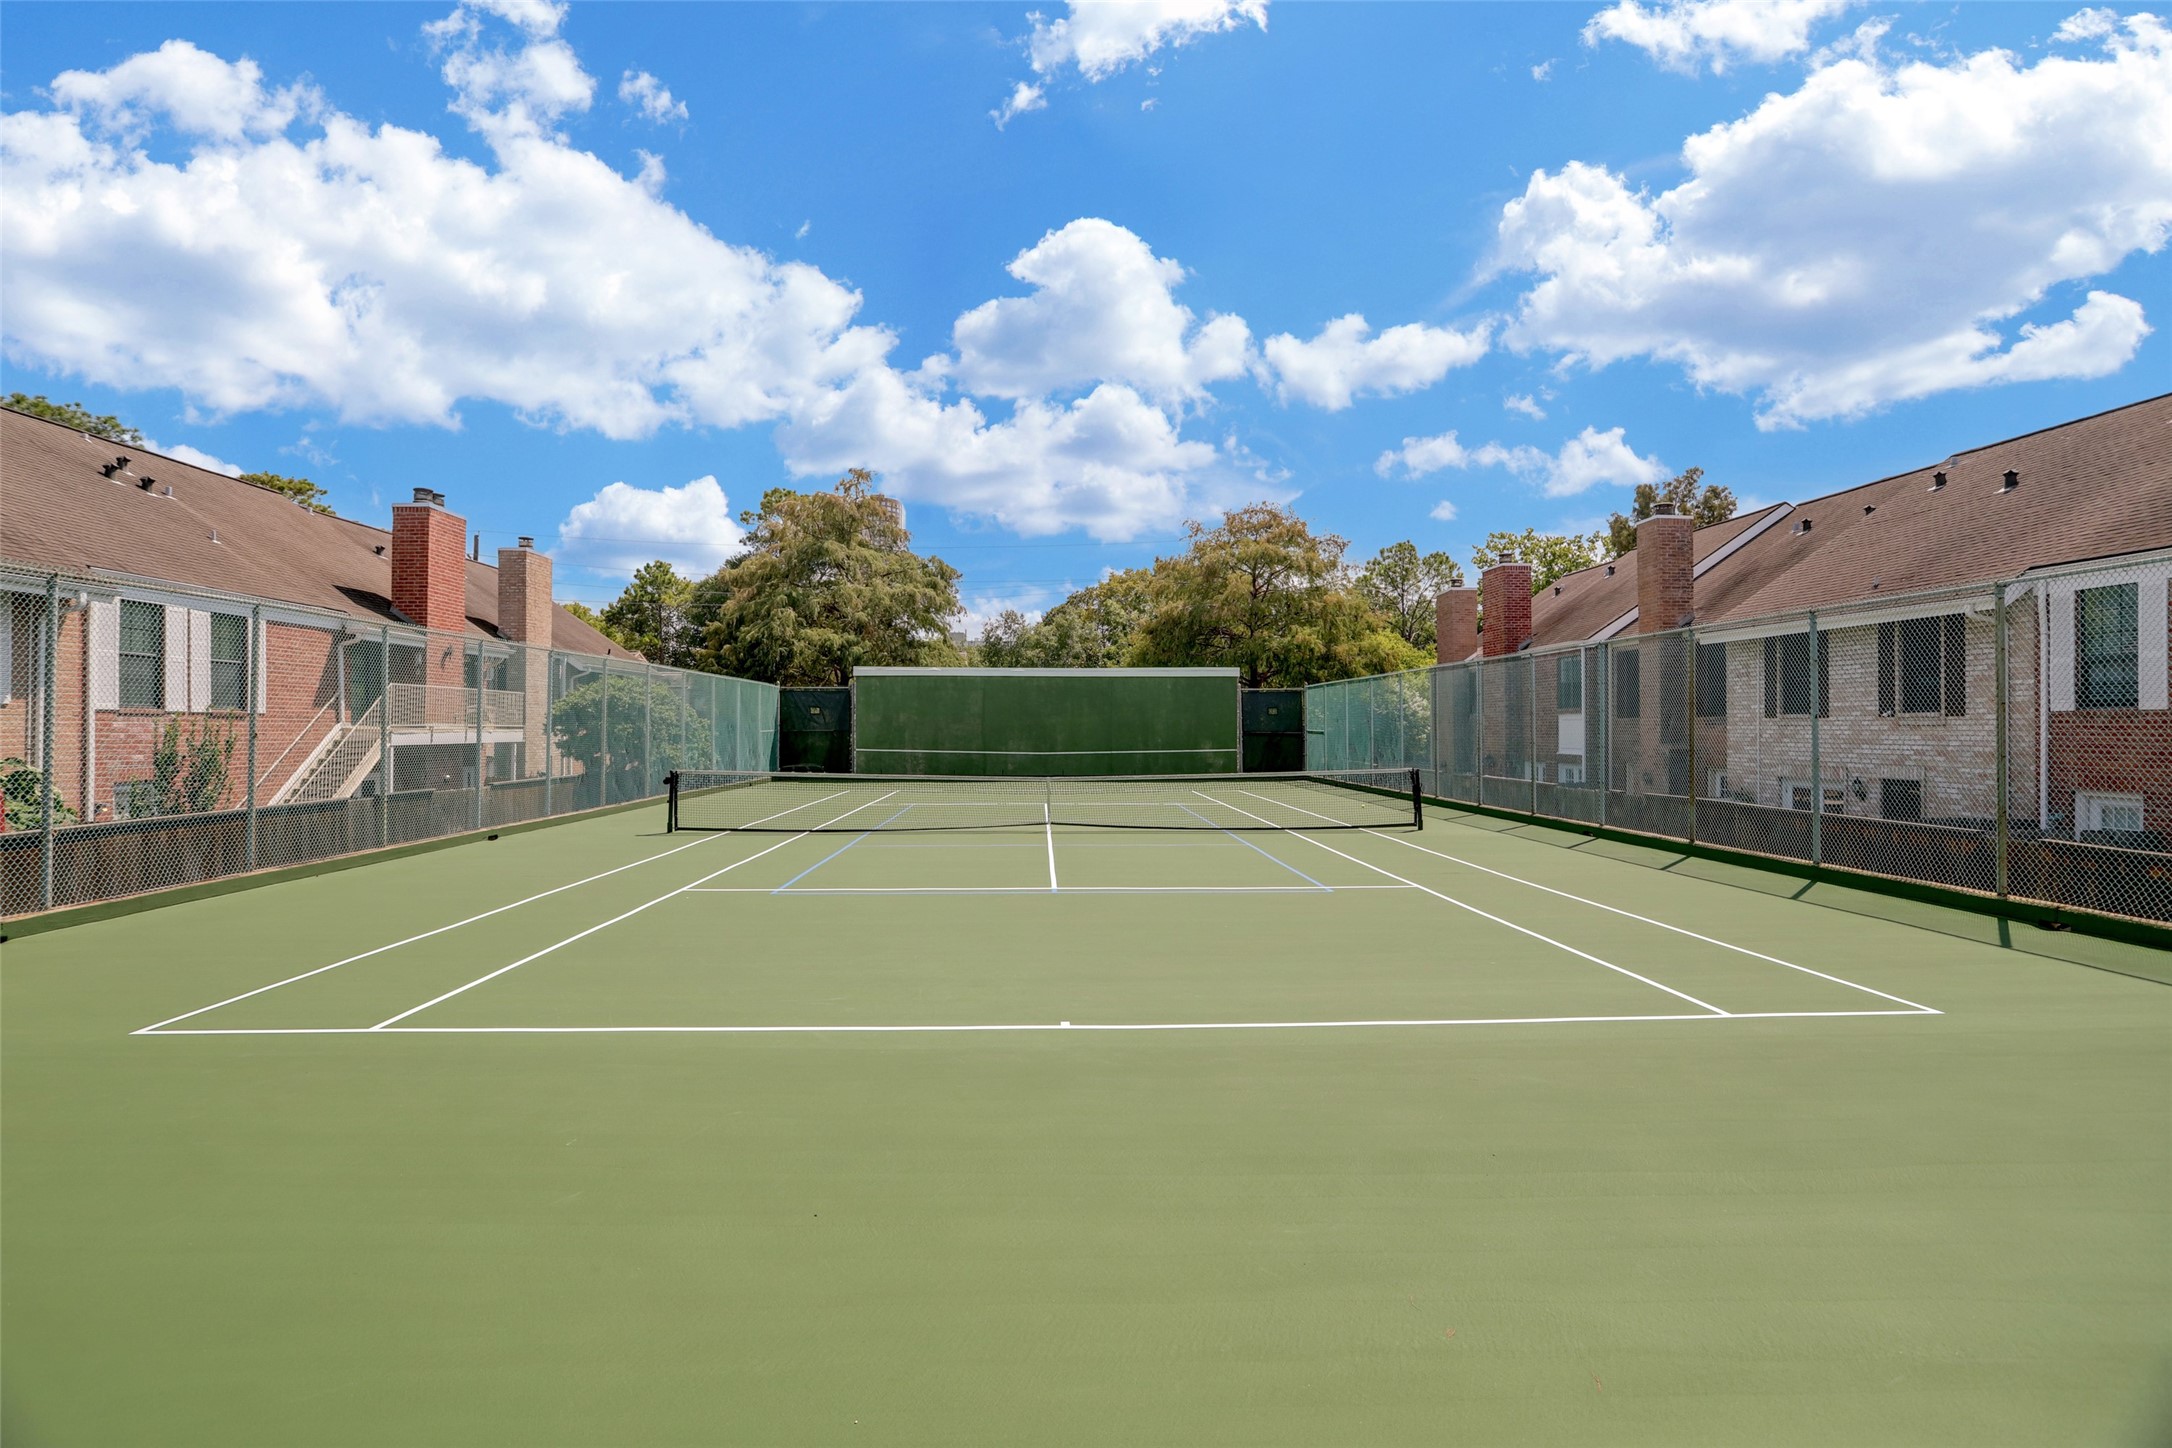 Woodway Point, a sought-after destination, boasts a state-of-the-art pickle balland tennis court that serves as the perfect post-work playtime venue.